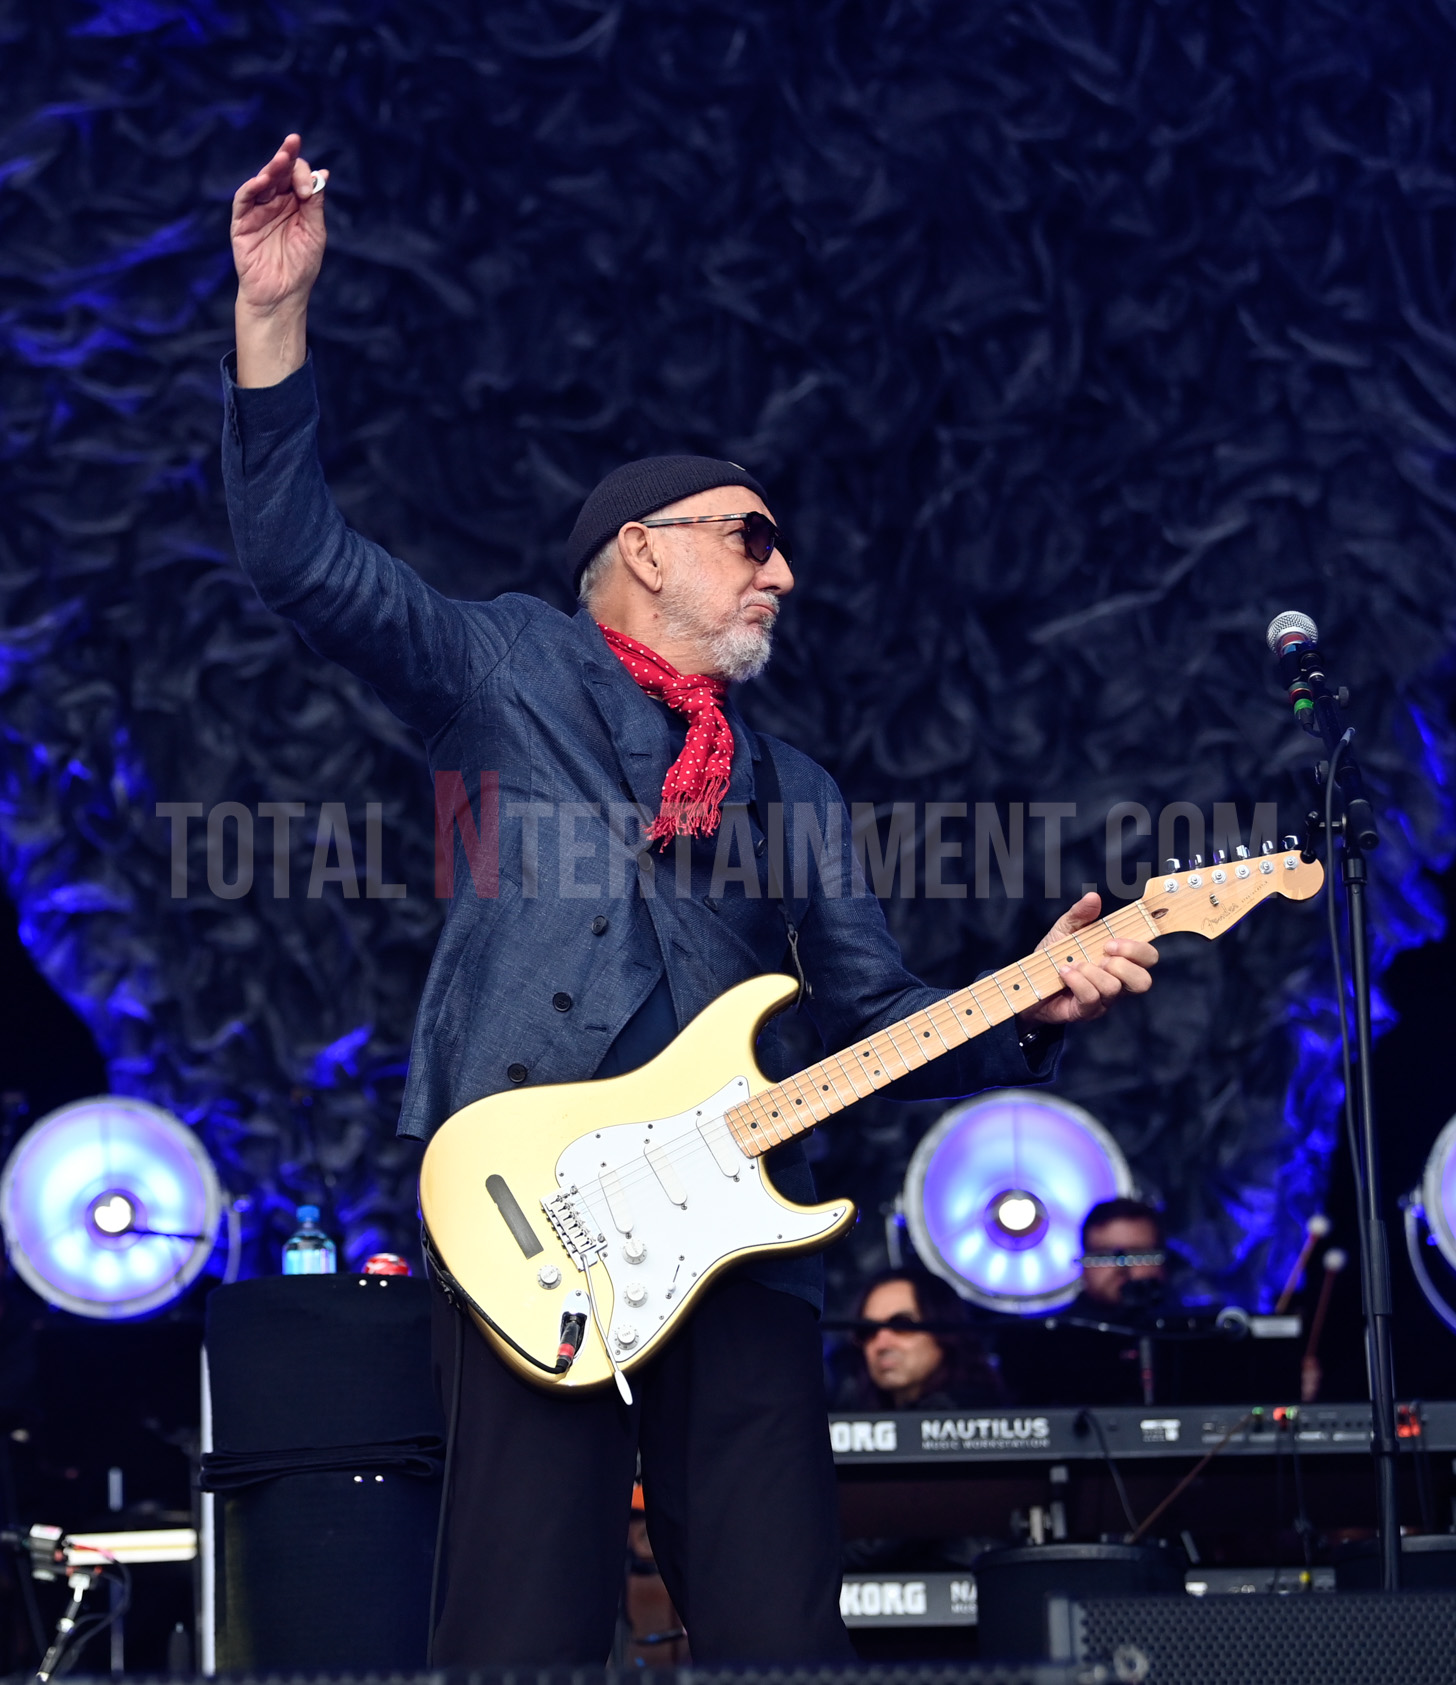 Live Event, Music, Stephen Farrell, Totalntertainment, The Who, Roger Daltry, Pete Townsend, Wigan, Music Photography